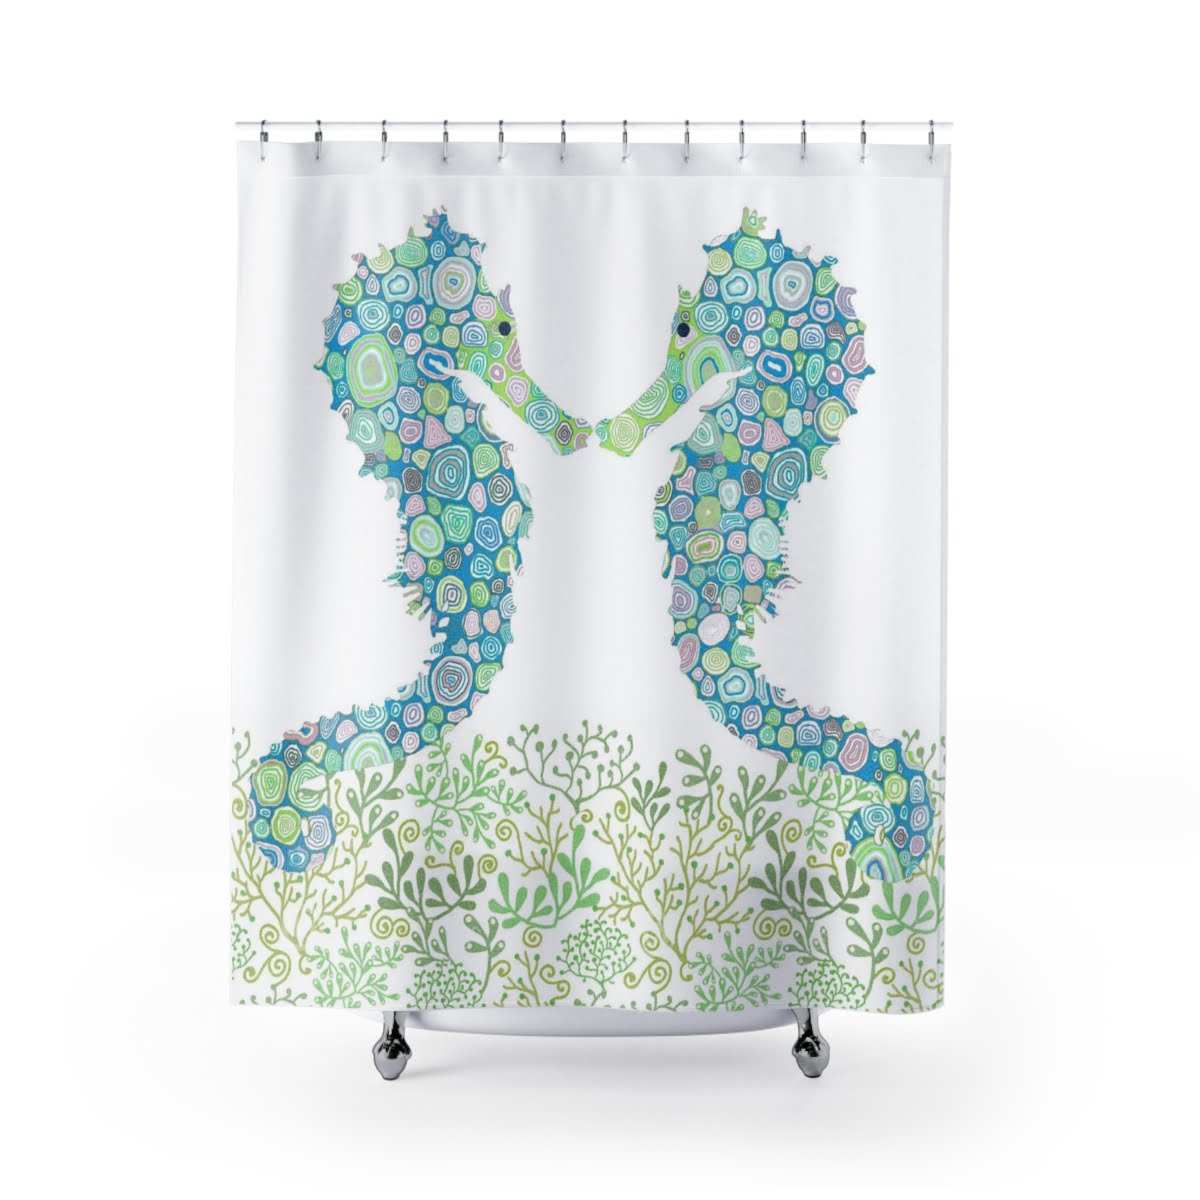 Kids Shower Curtain with blue and green seahorse design